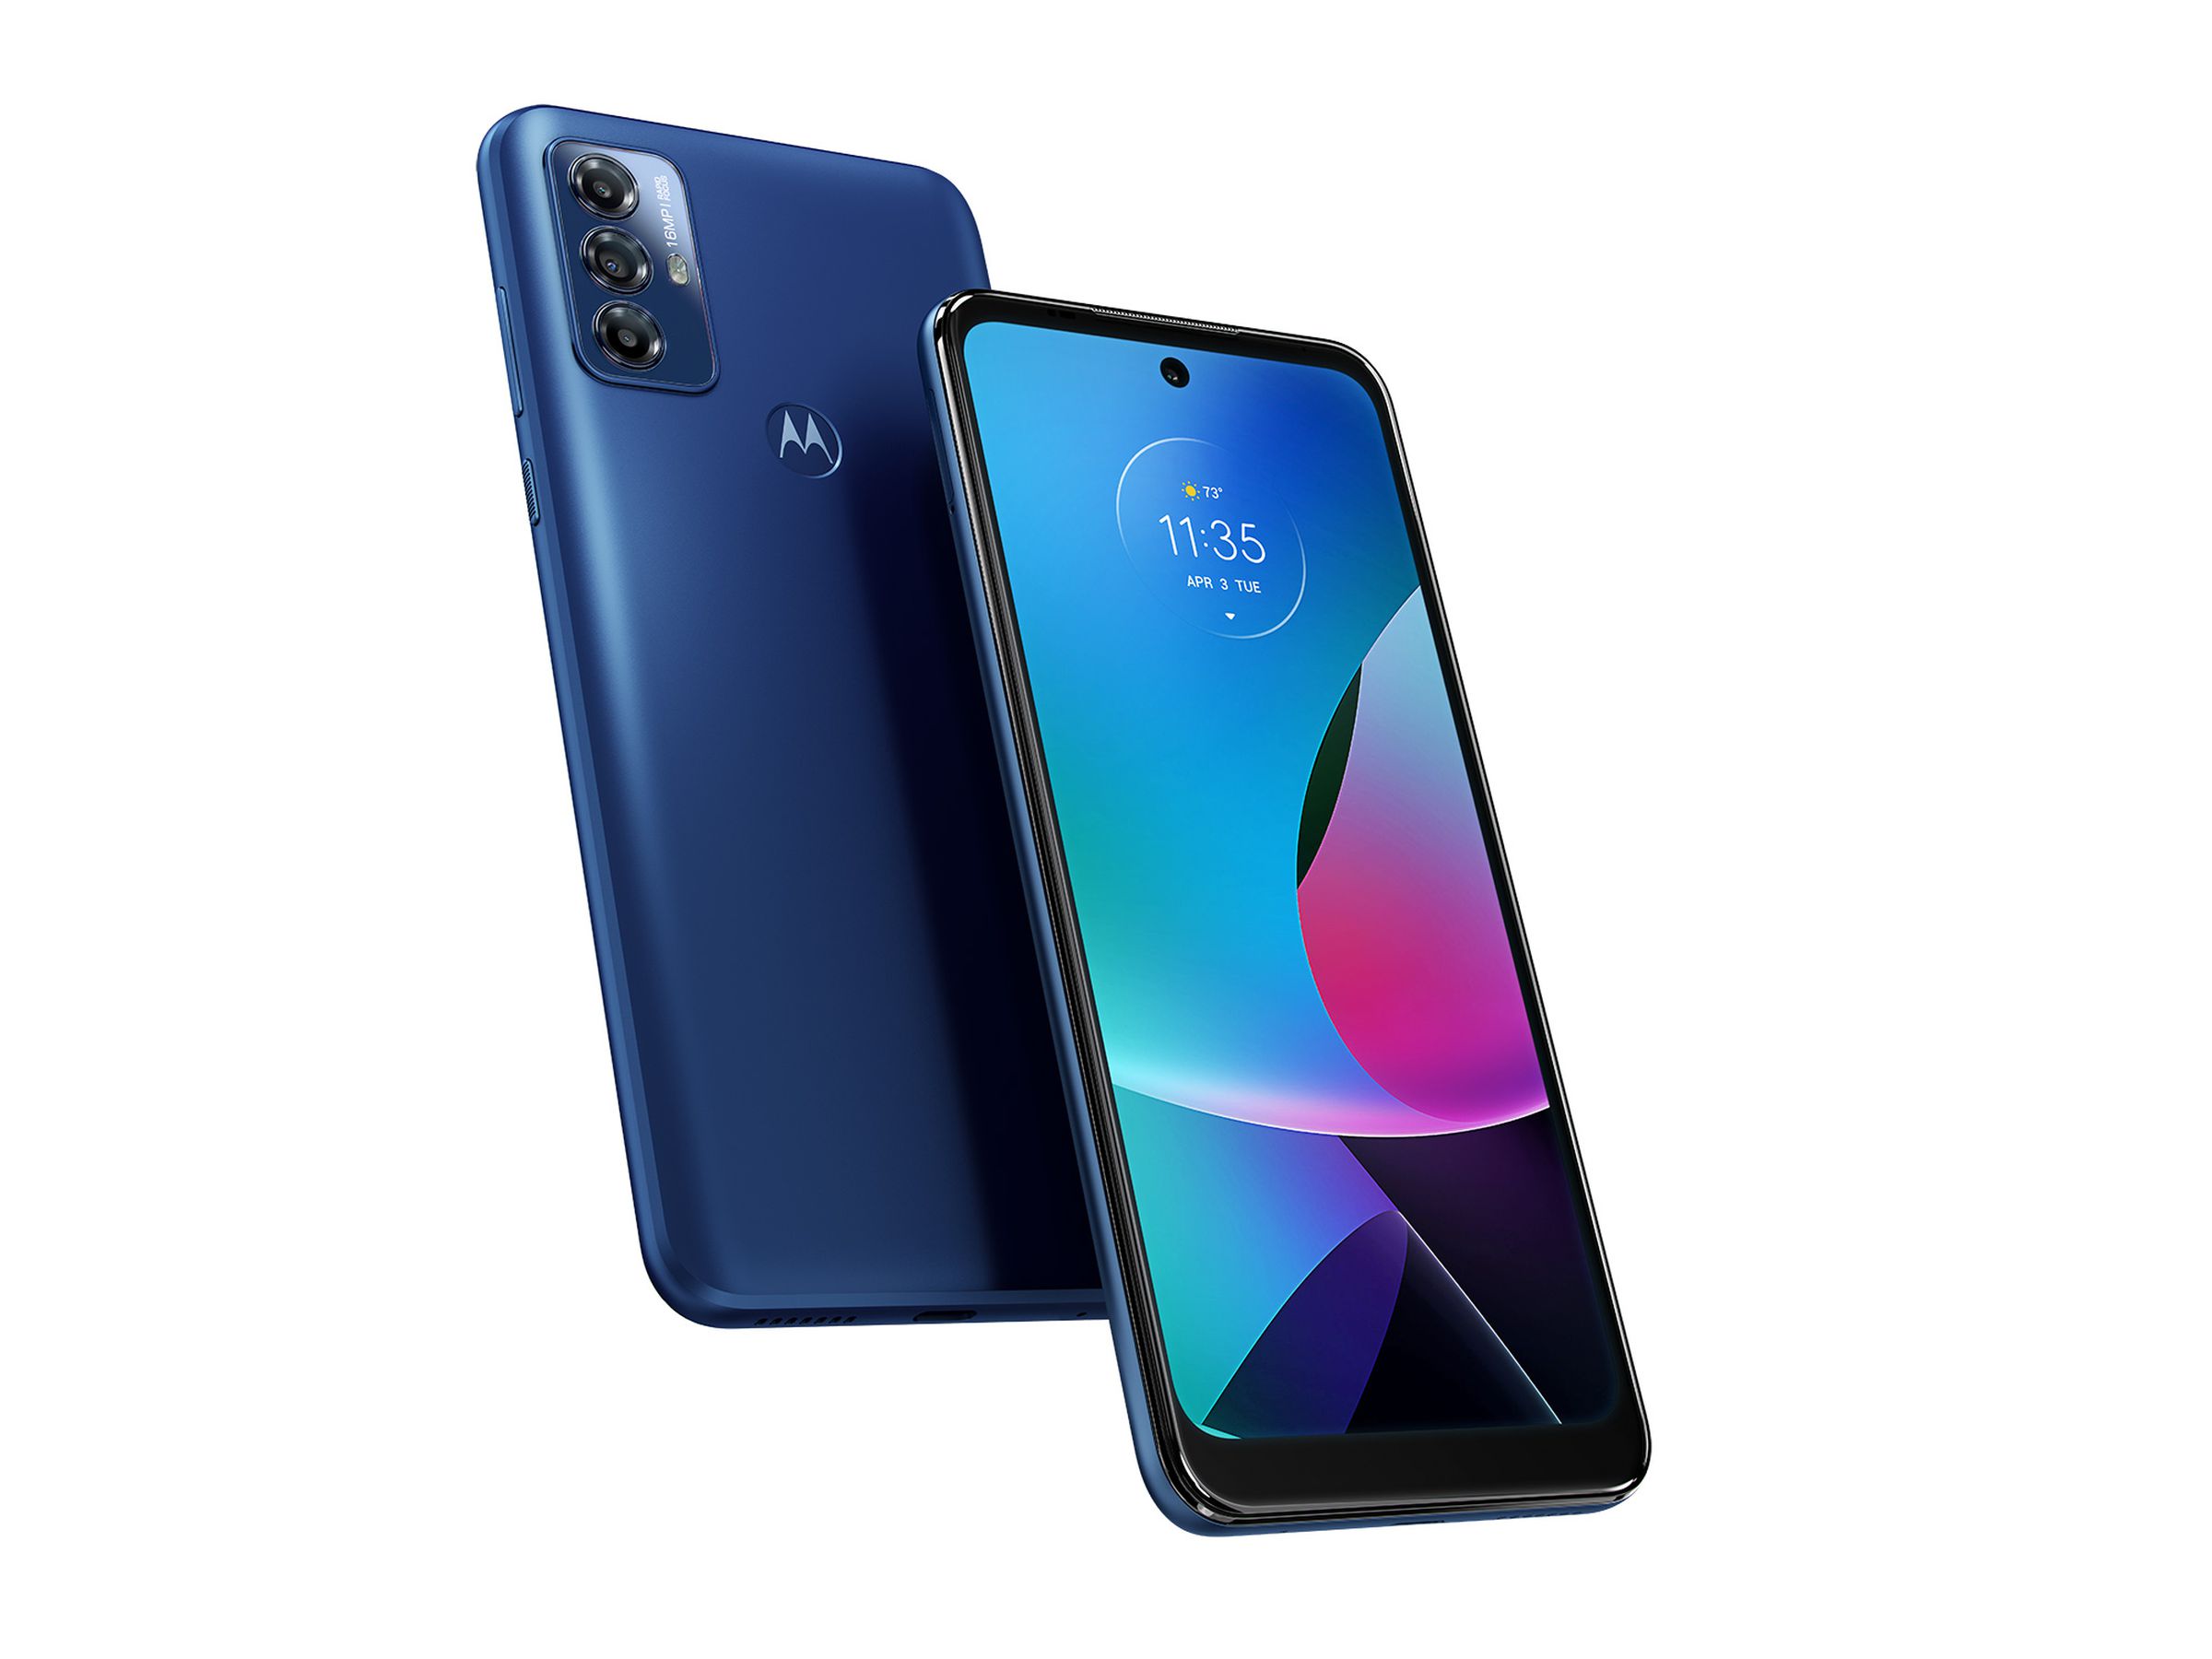 Render of Motorola Moto G Play showing front and back panels in navy color option.